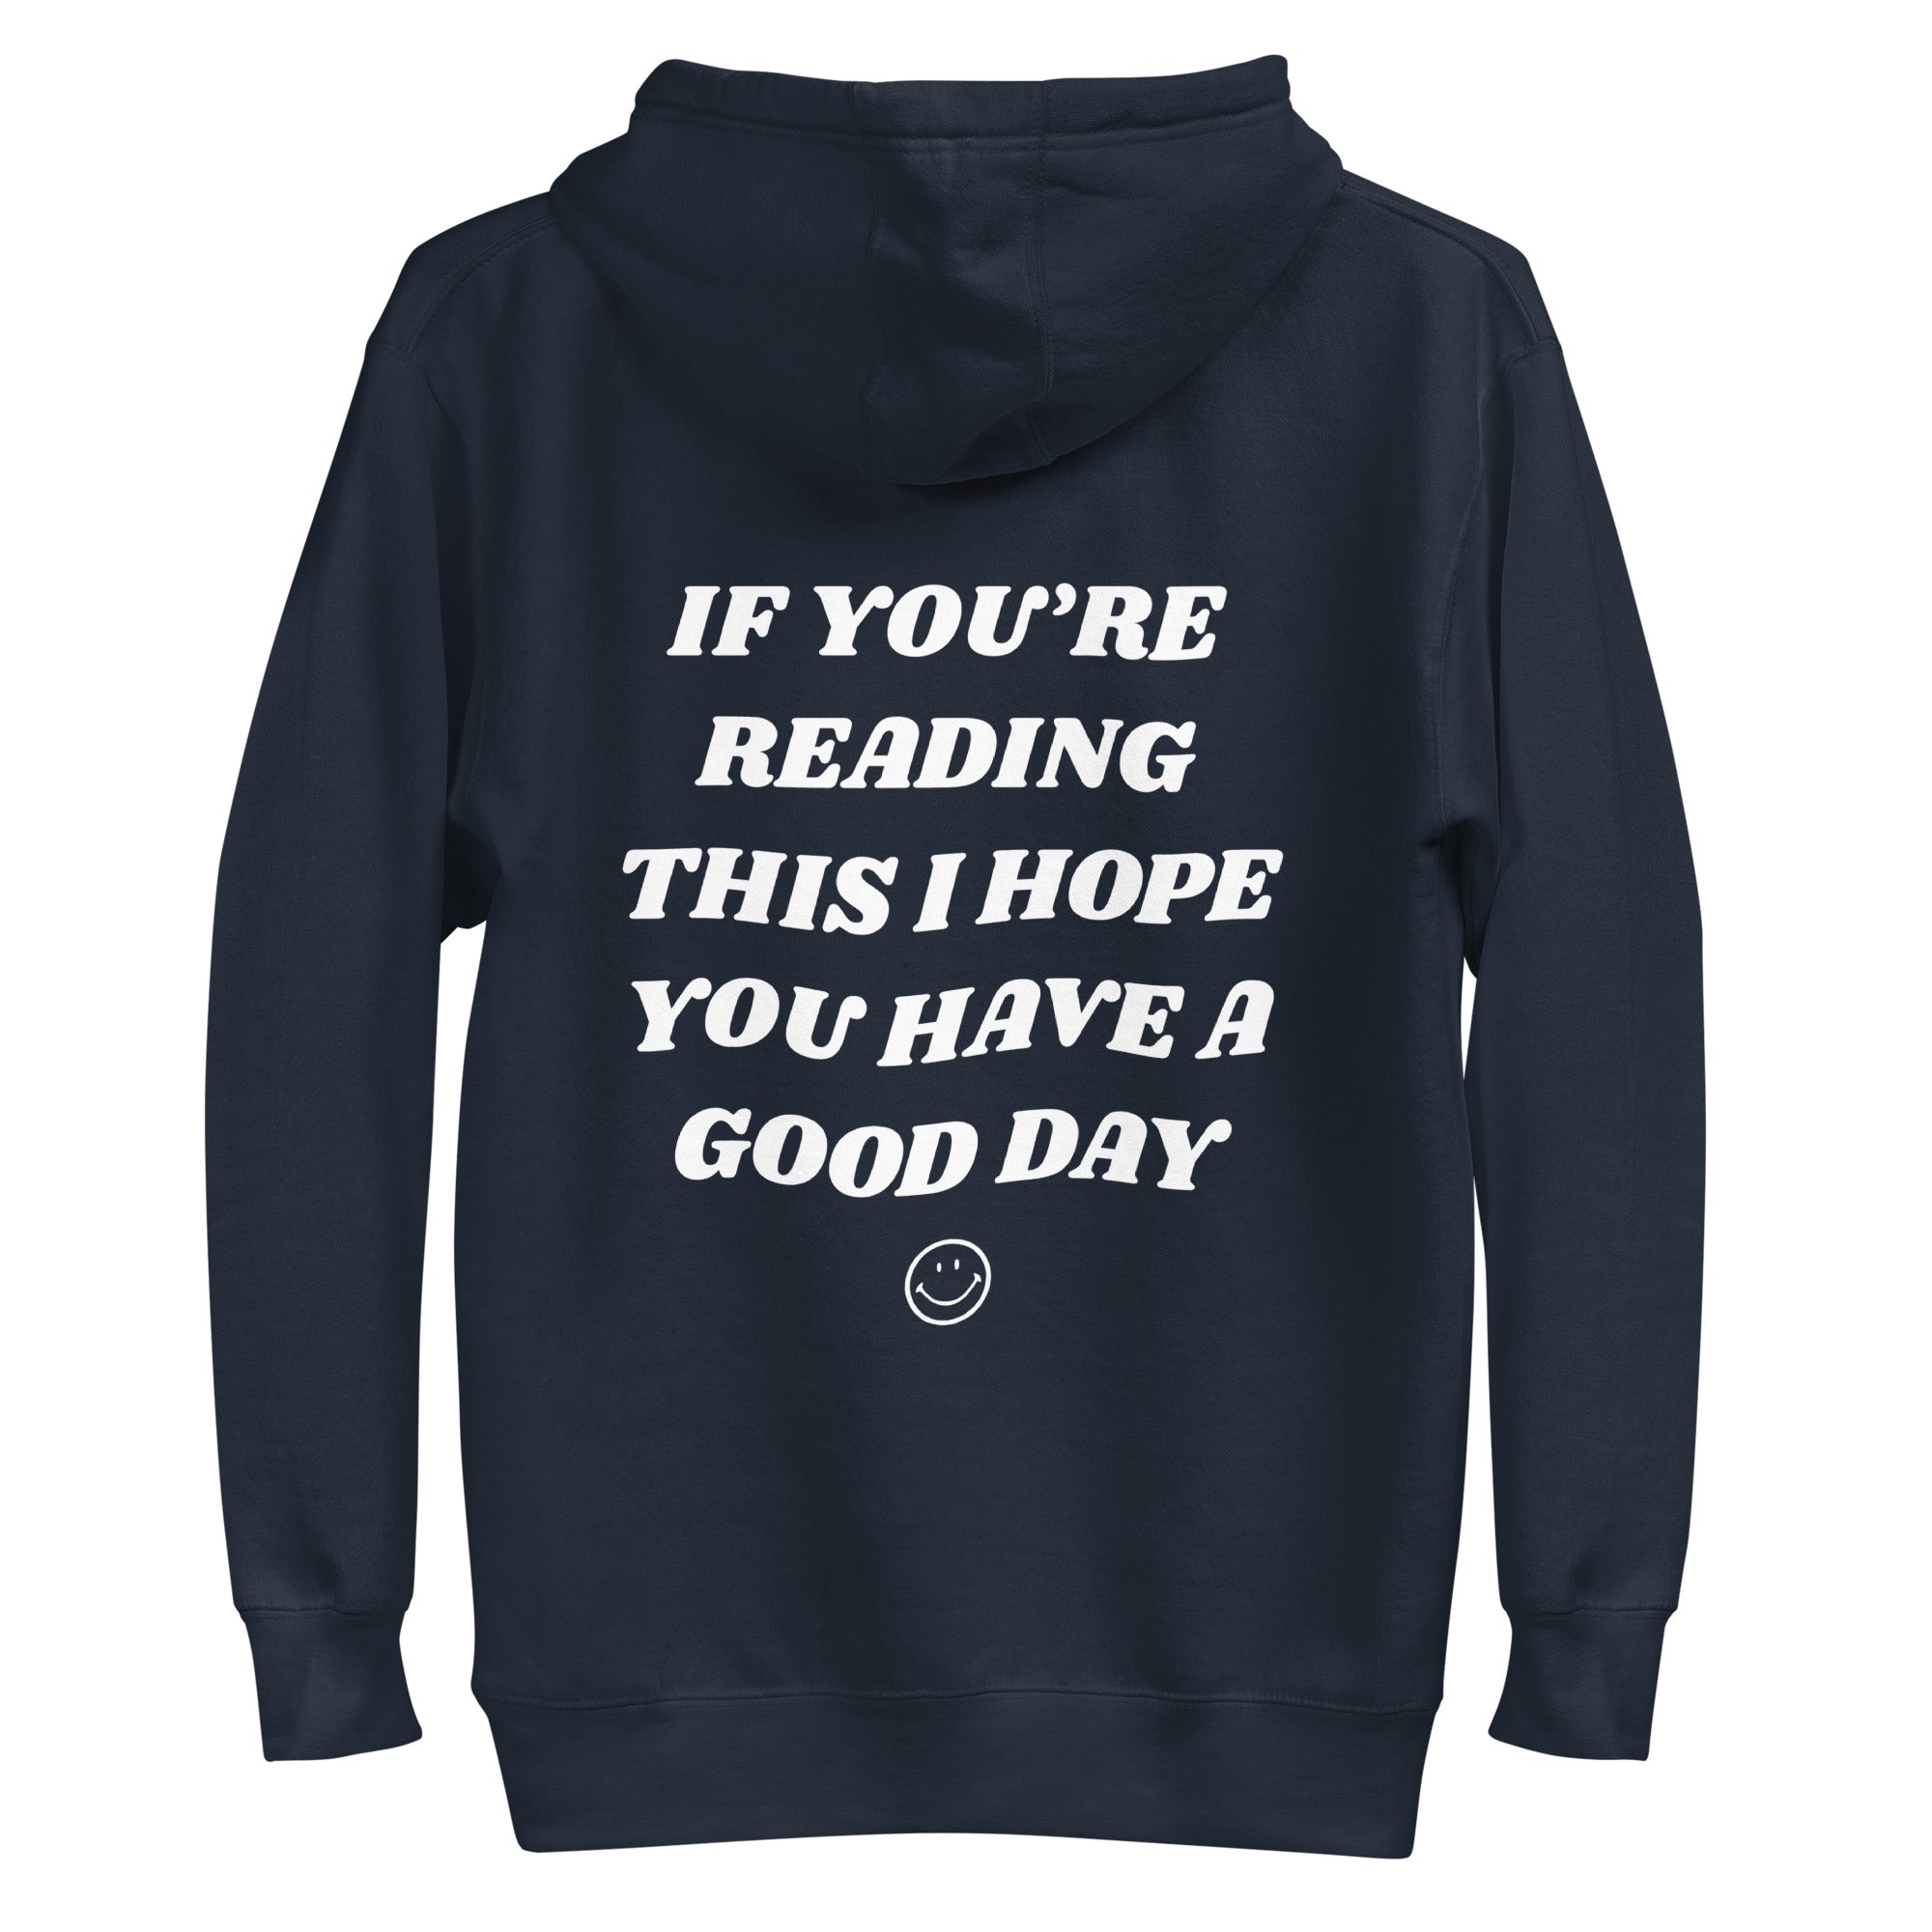 Have A Good Day Women's Hoodie